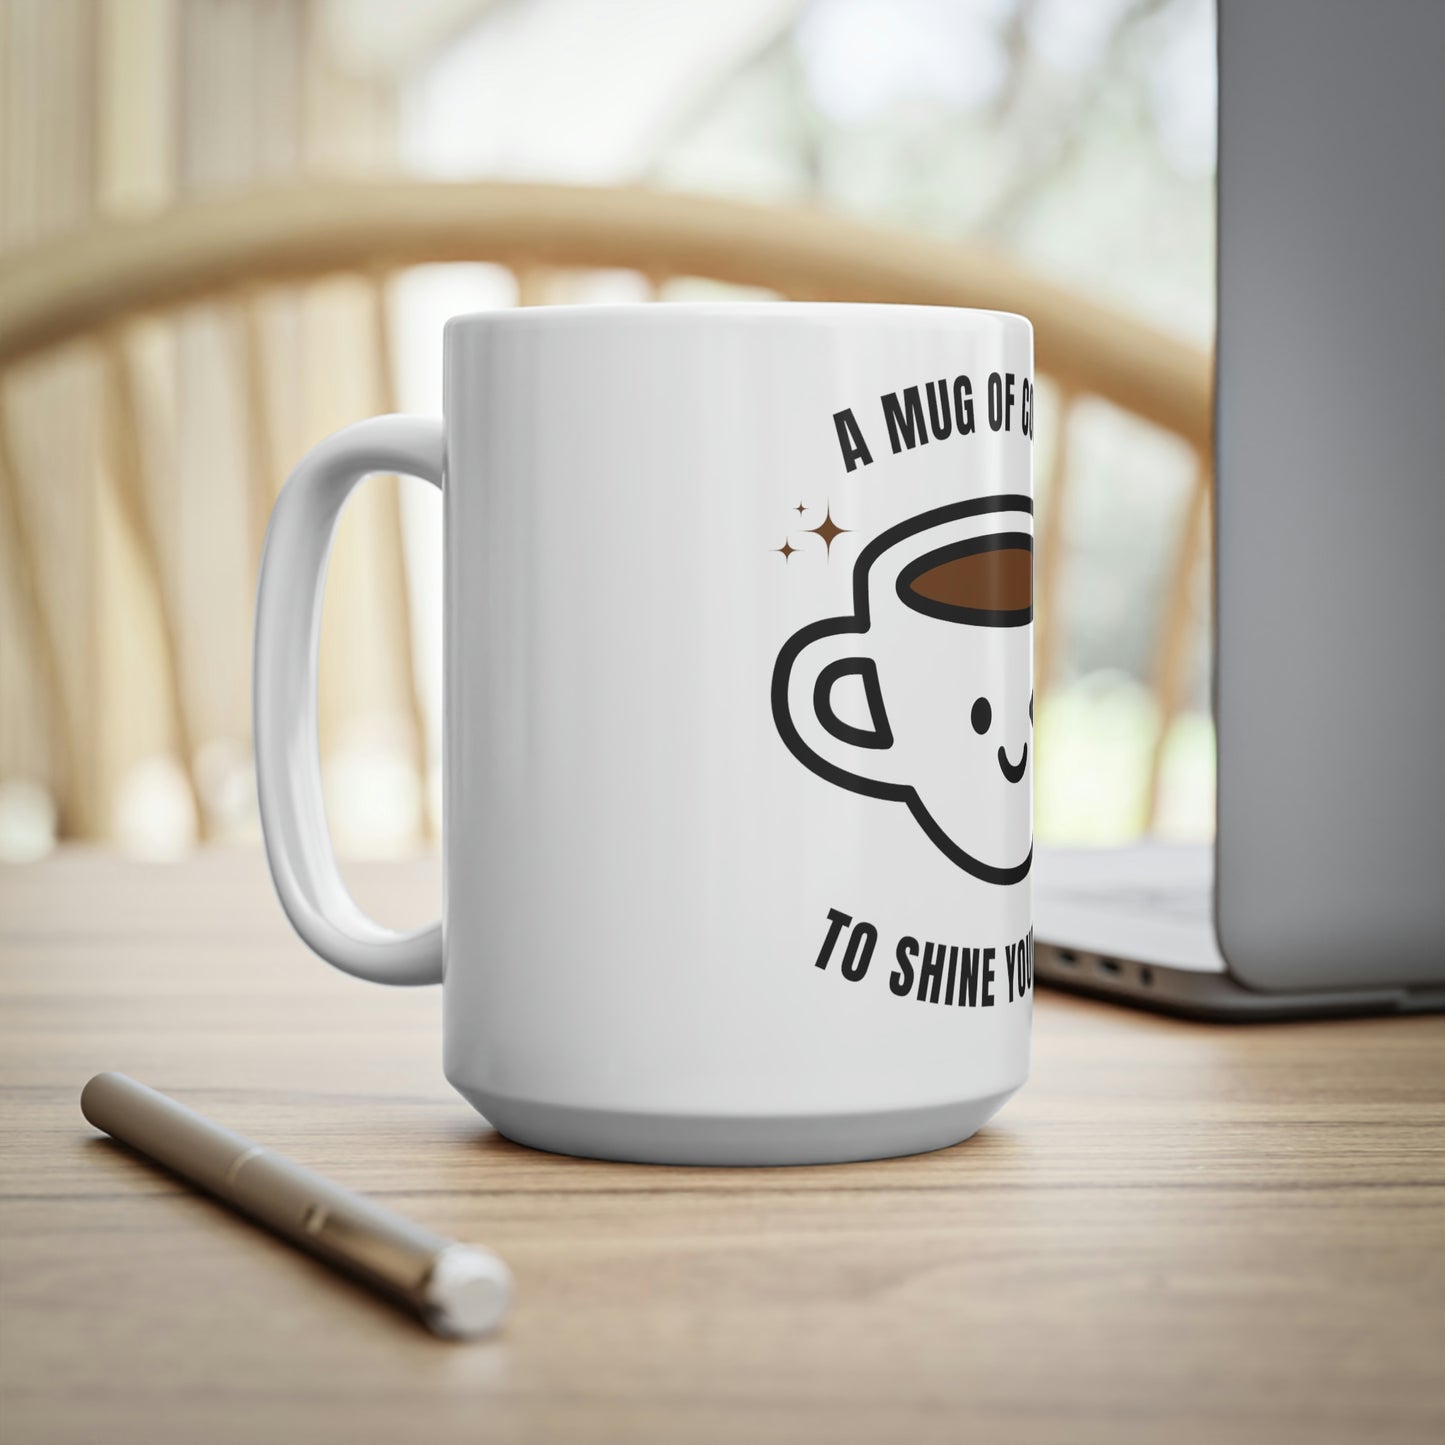 A mug of coffee to shine your day Ceramic Coffee Cups, 11oz, 15oz gift funny humor hot drink need work drink mug cute tea small personalized